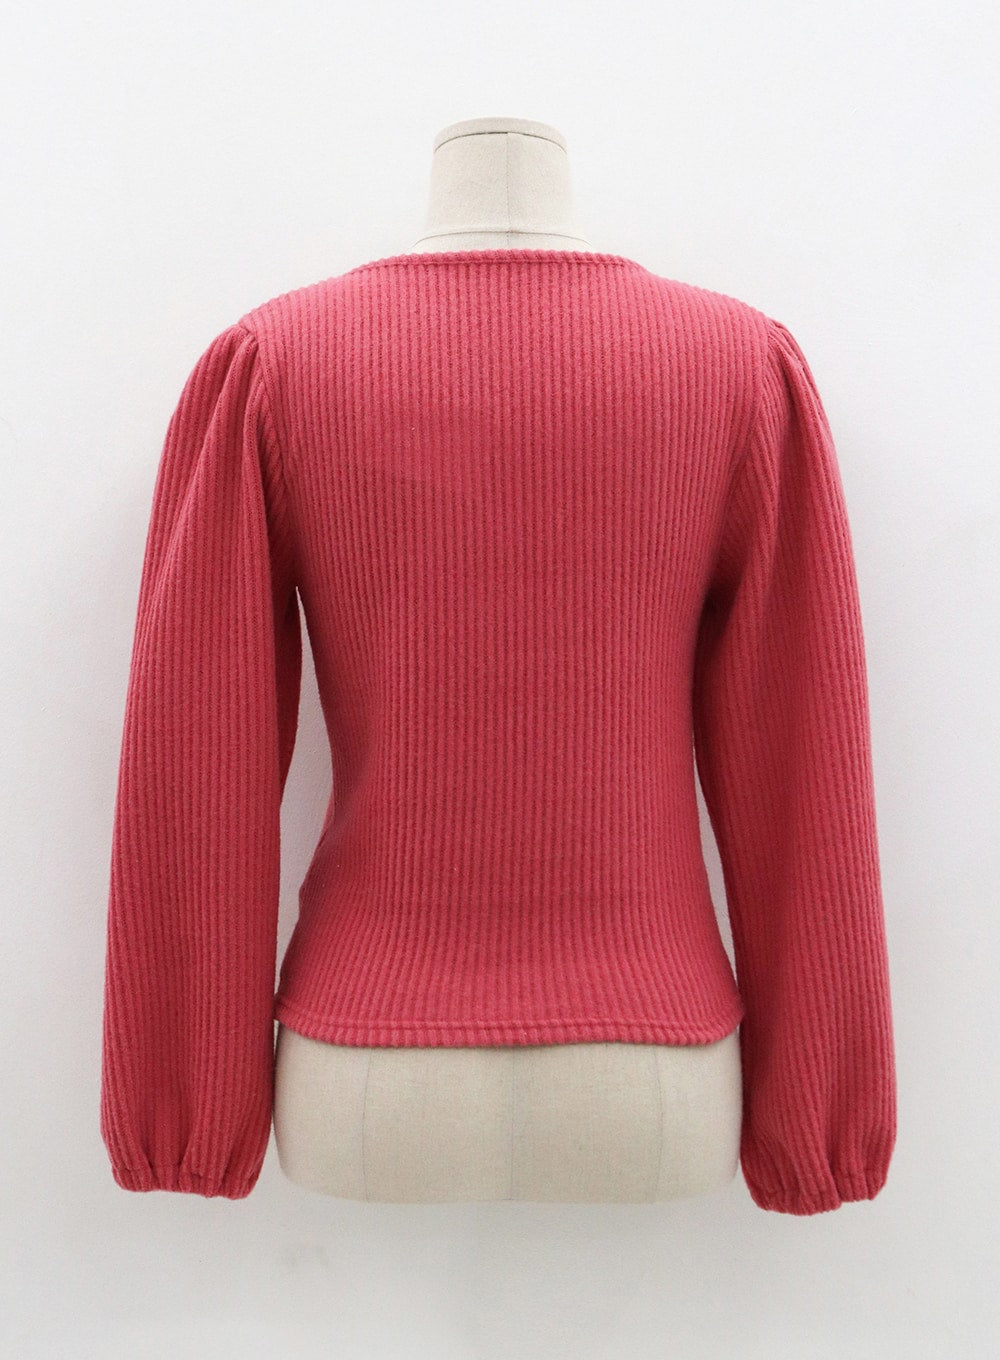 Square Neck Puffy Sleeves Knit Top BO20